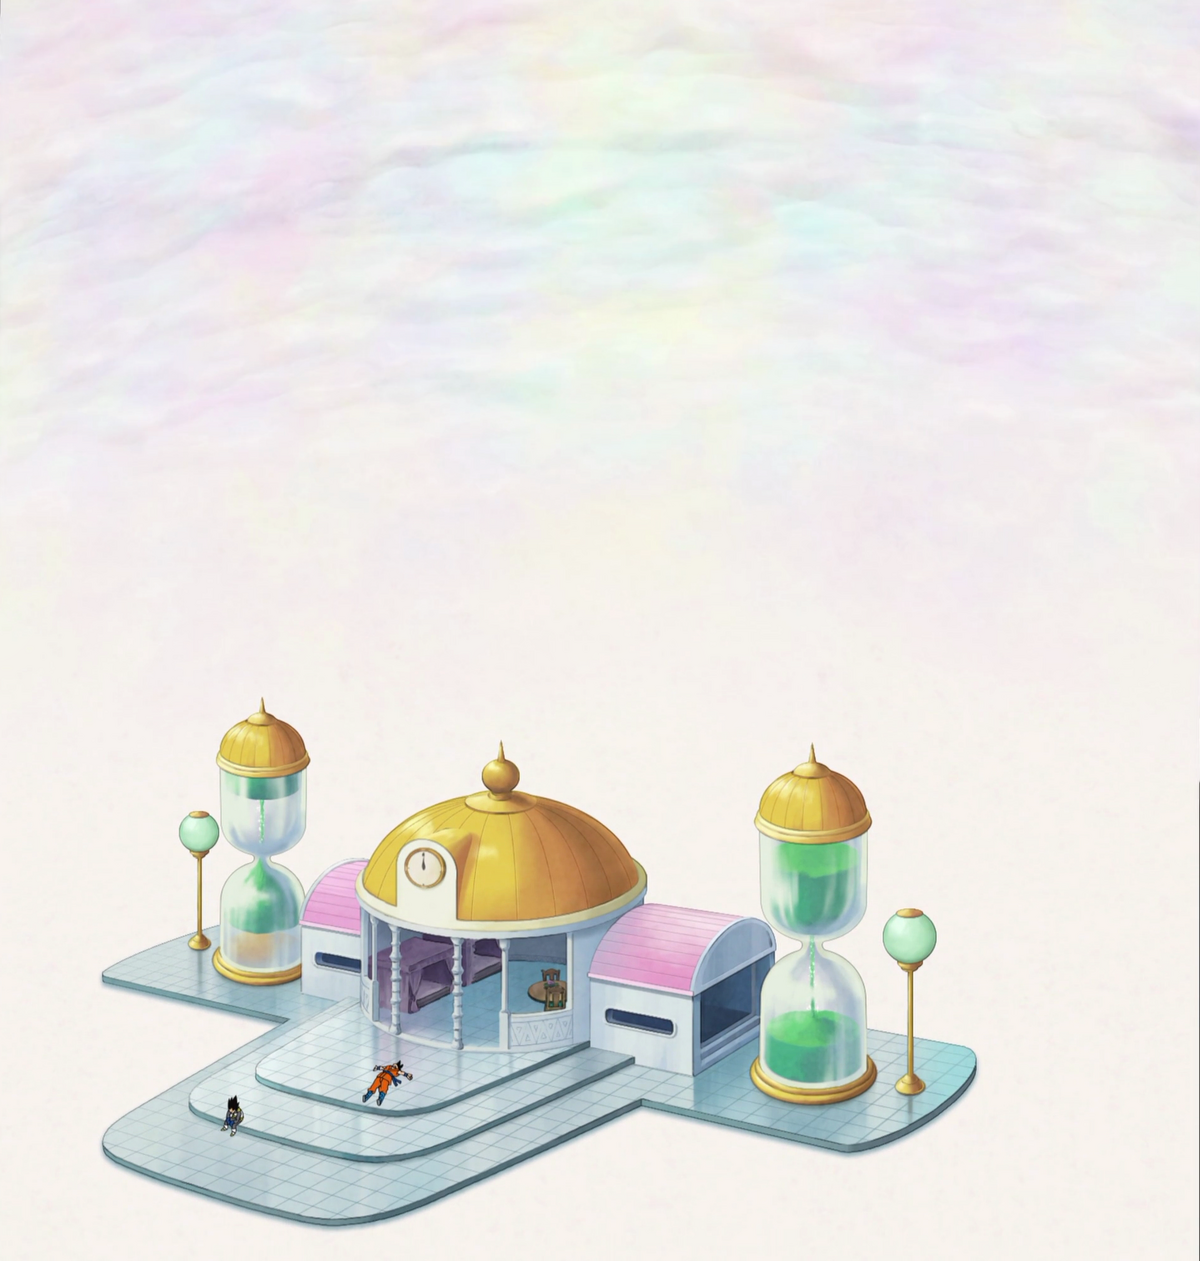 Emerge in the Hyperbolic Time Chamber by pinkycute03 on DeviantArt